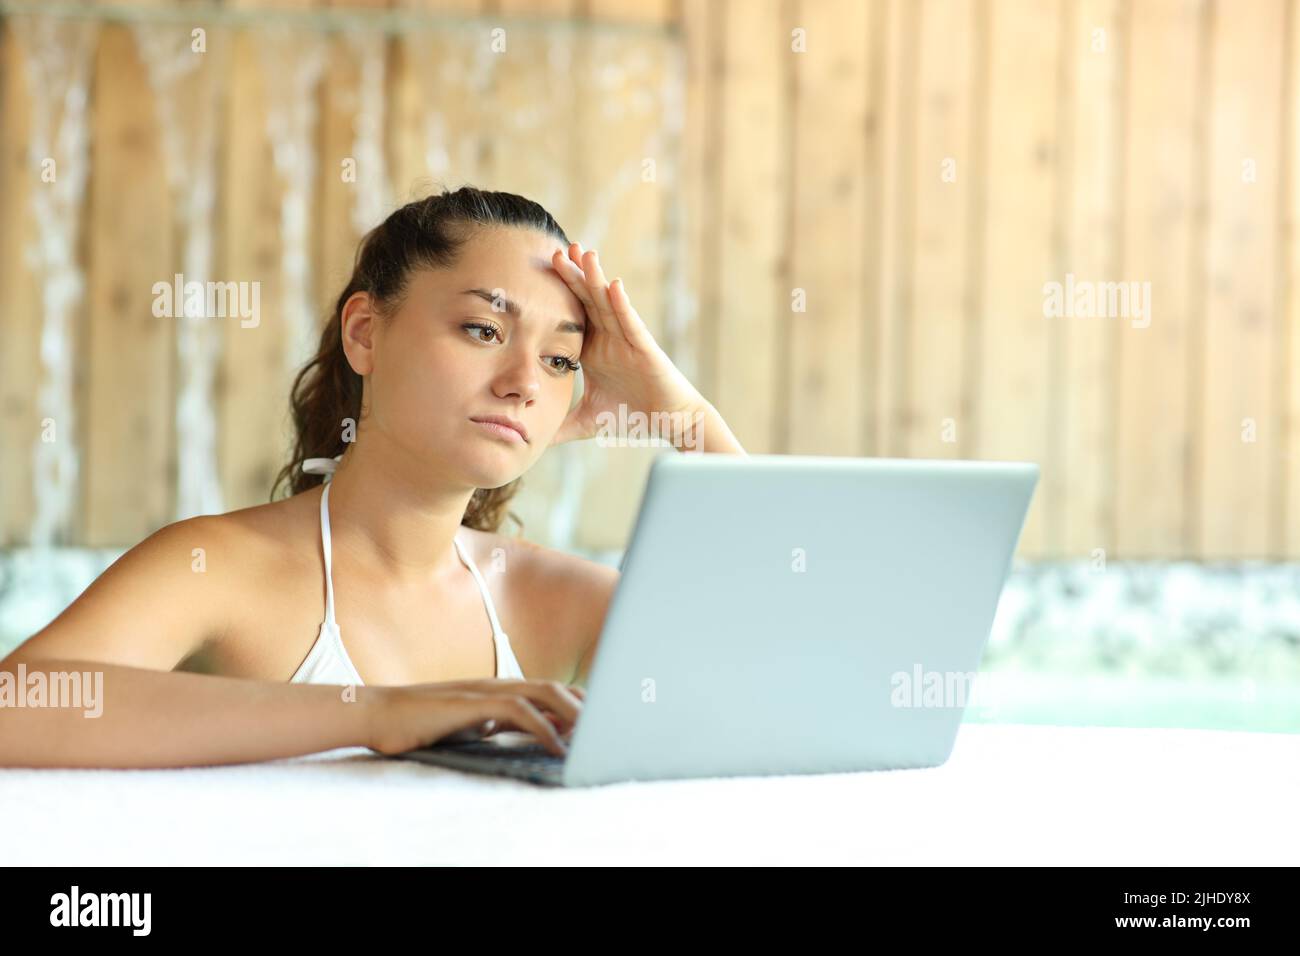 Worried woman unable to relax using laptop in spa Stock Photo